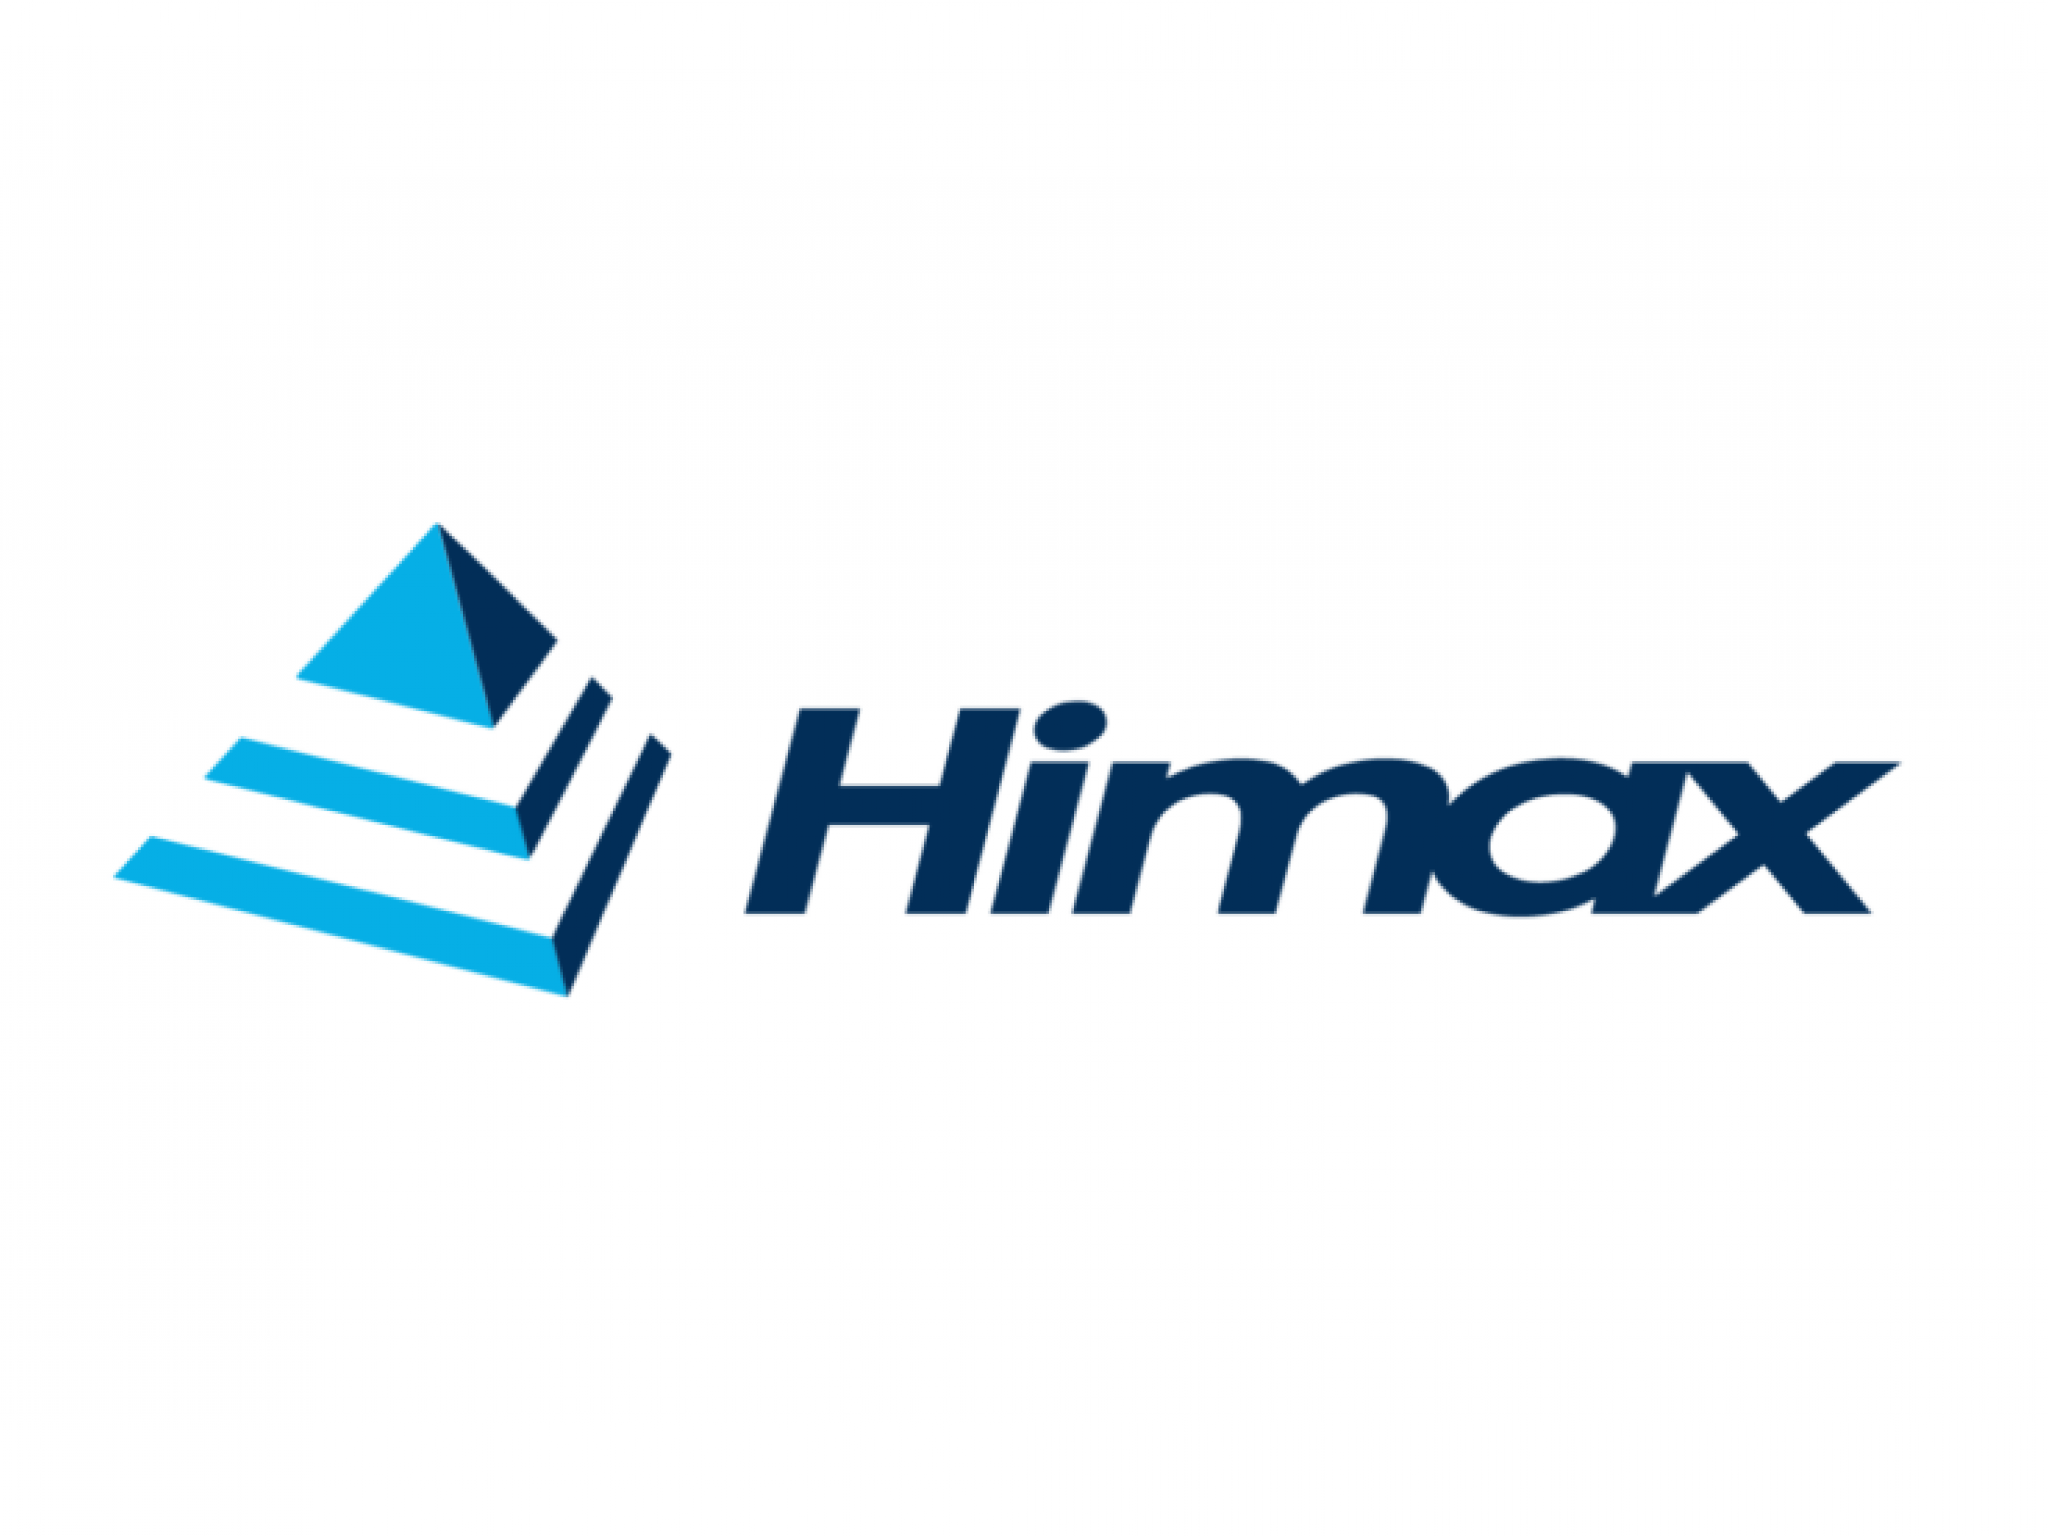  himax-tech-ceo-calls-q1-low-point-foresees-sales-surge-in-automotive-sector 